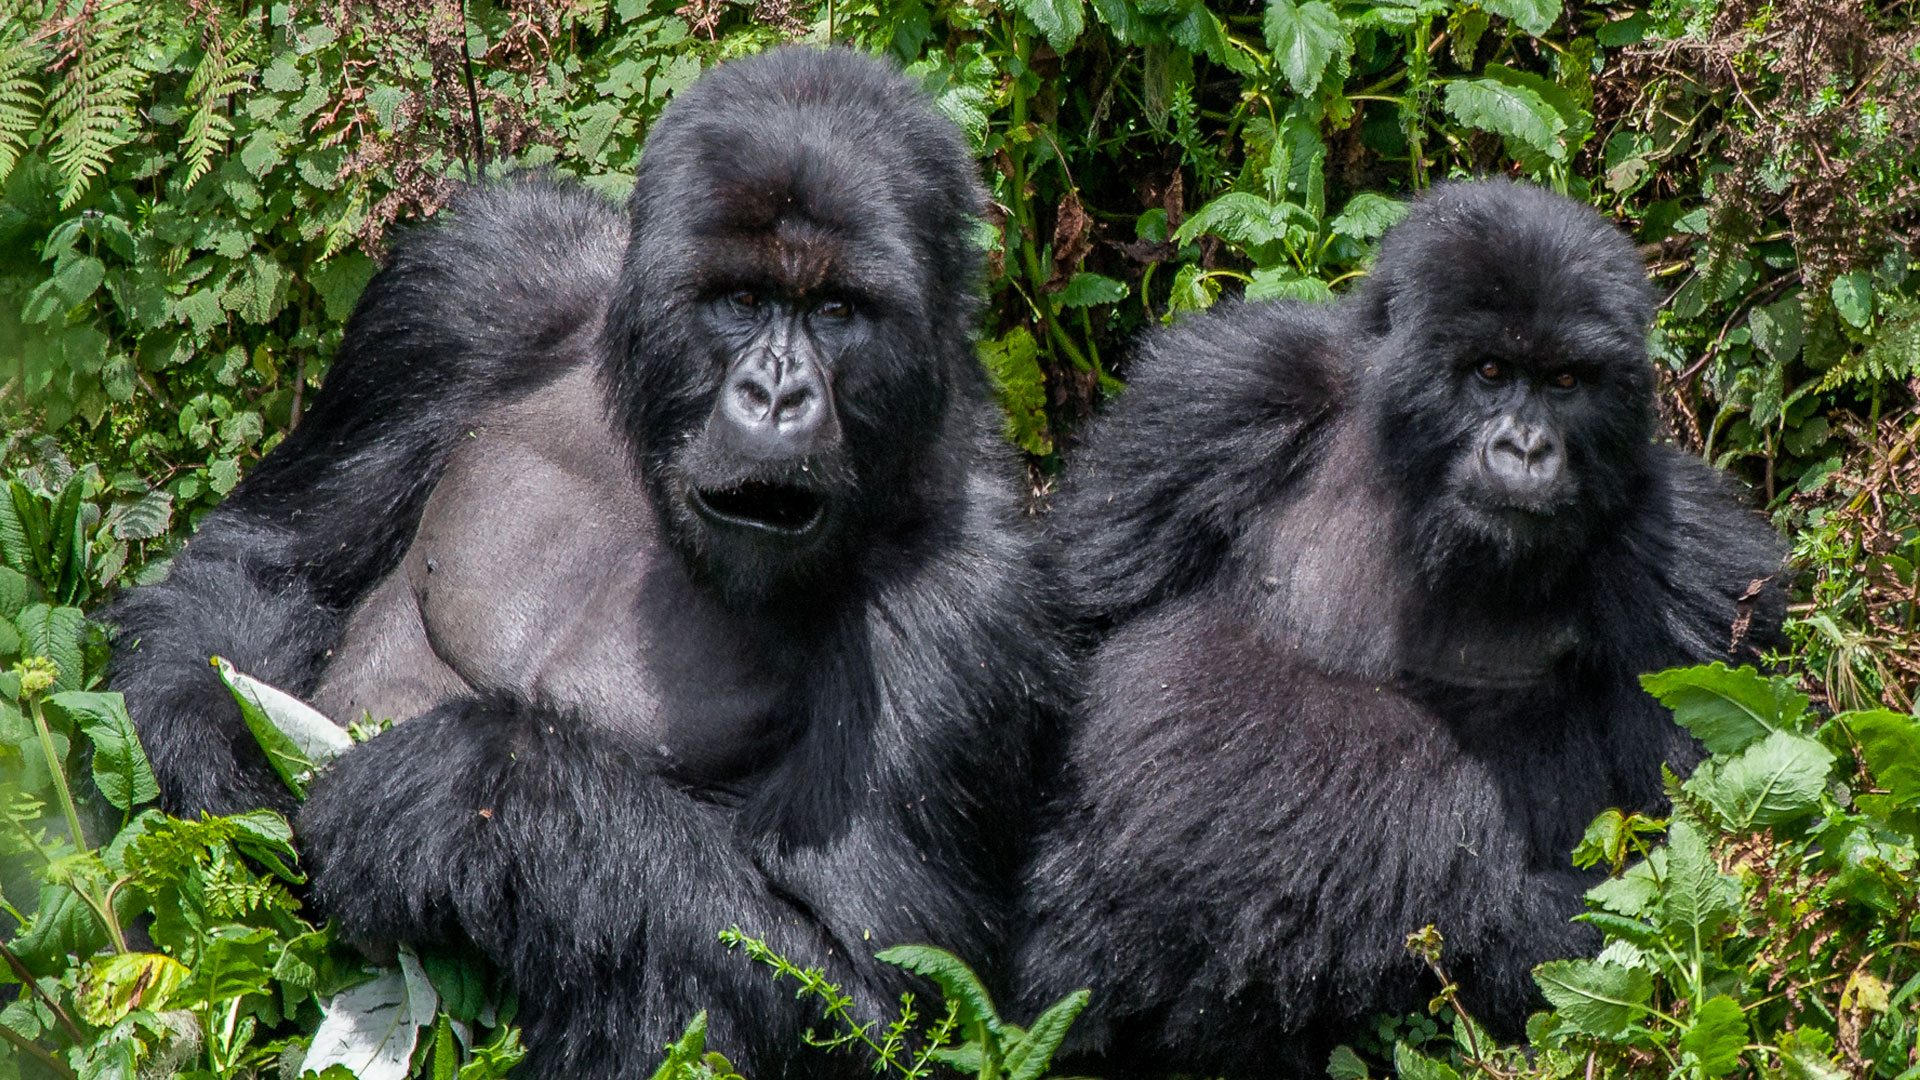 Road Trips from Kigali to Bwindi Impenetrable National Park